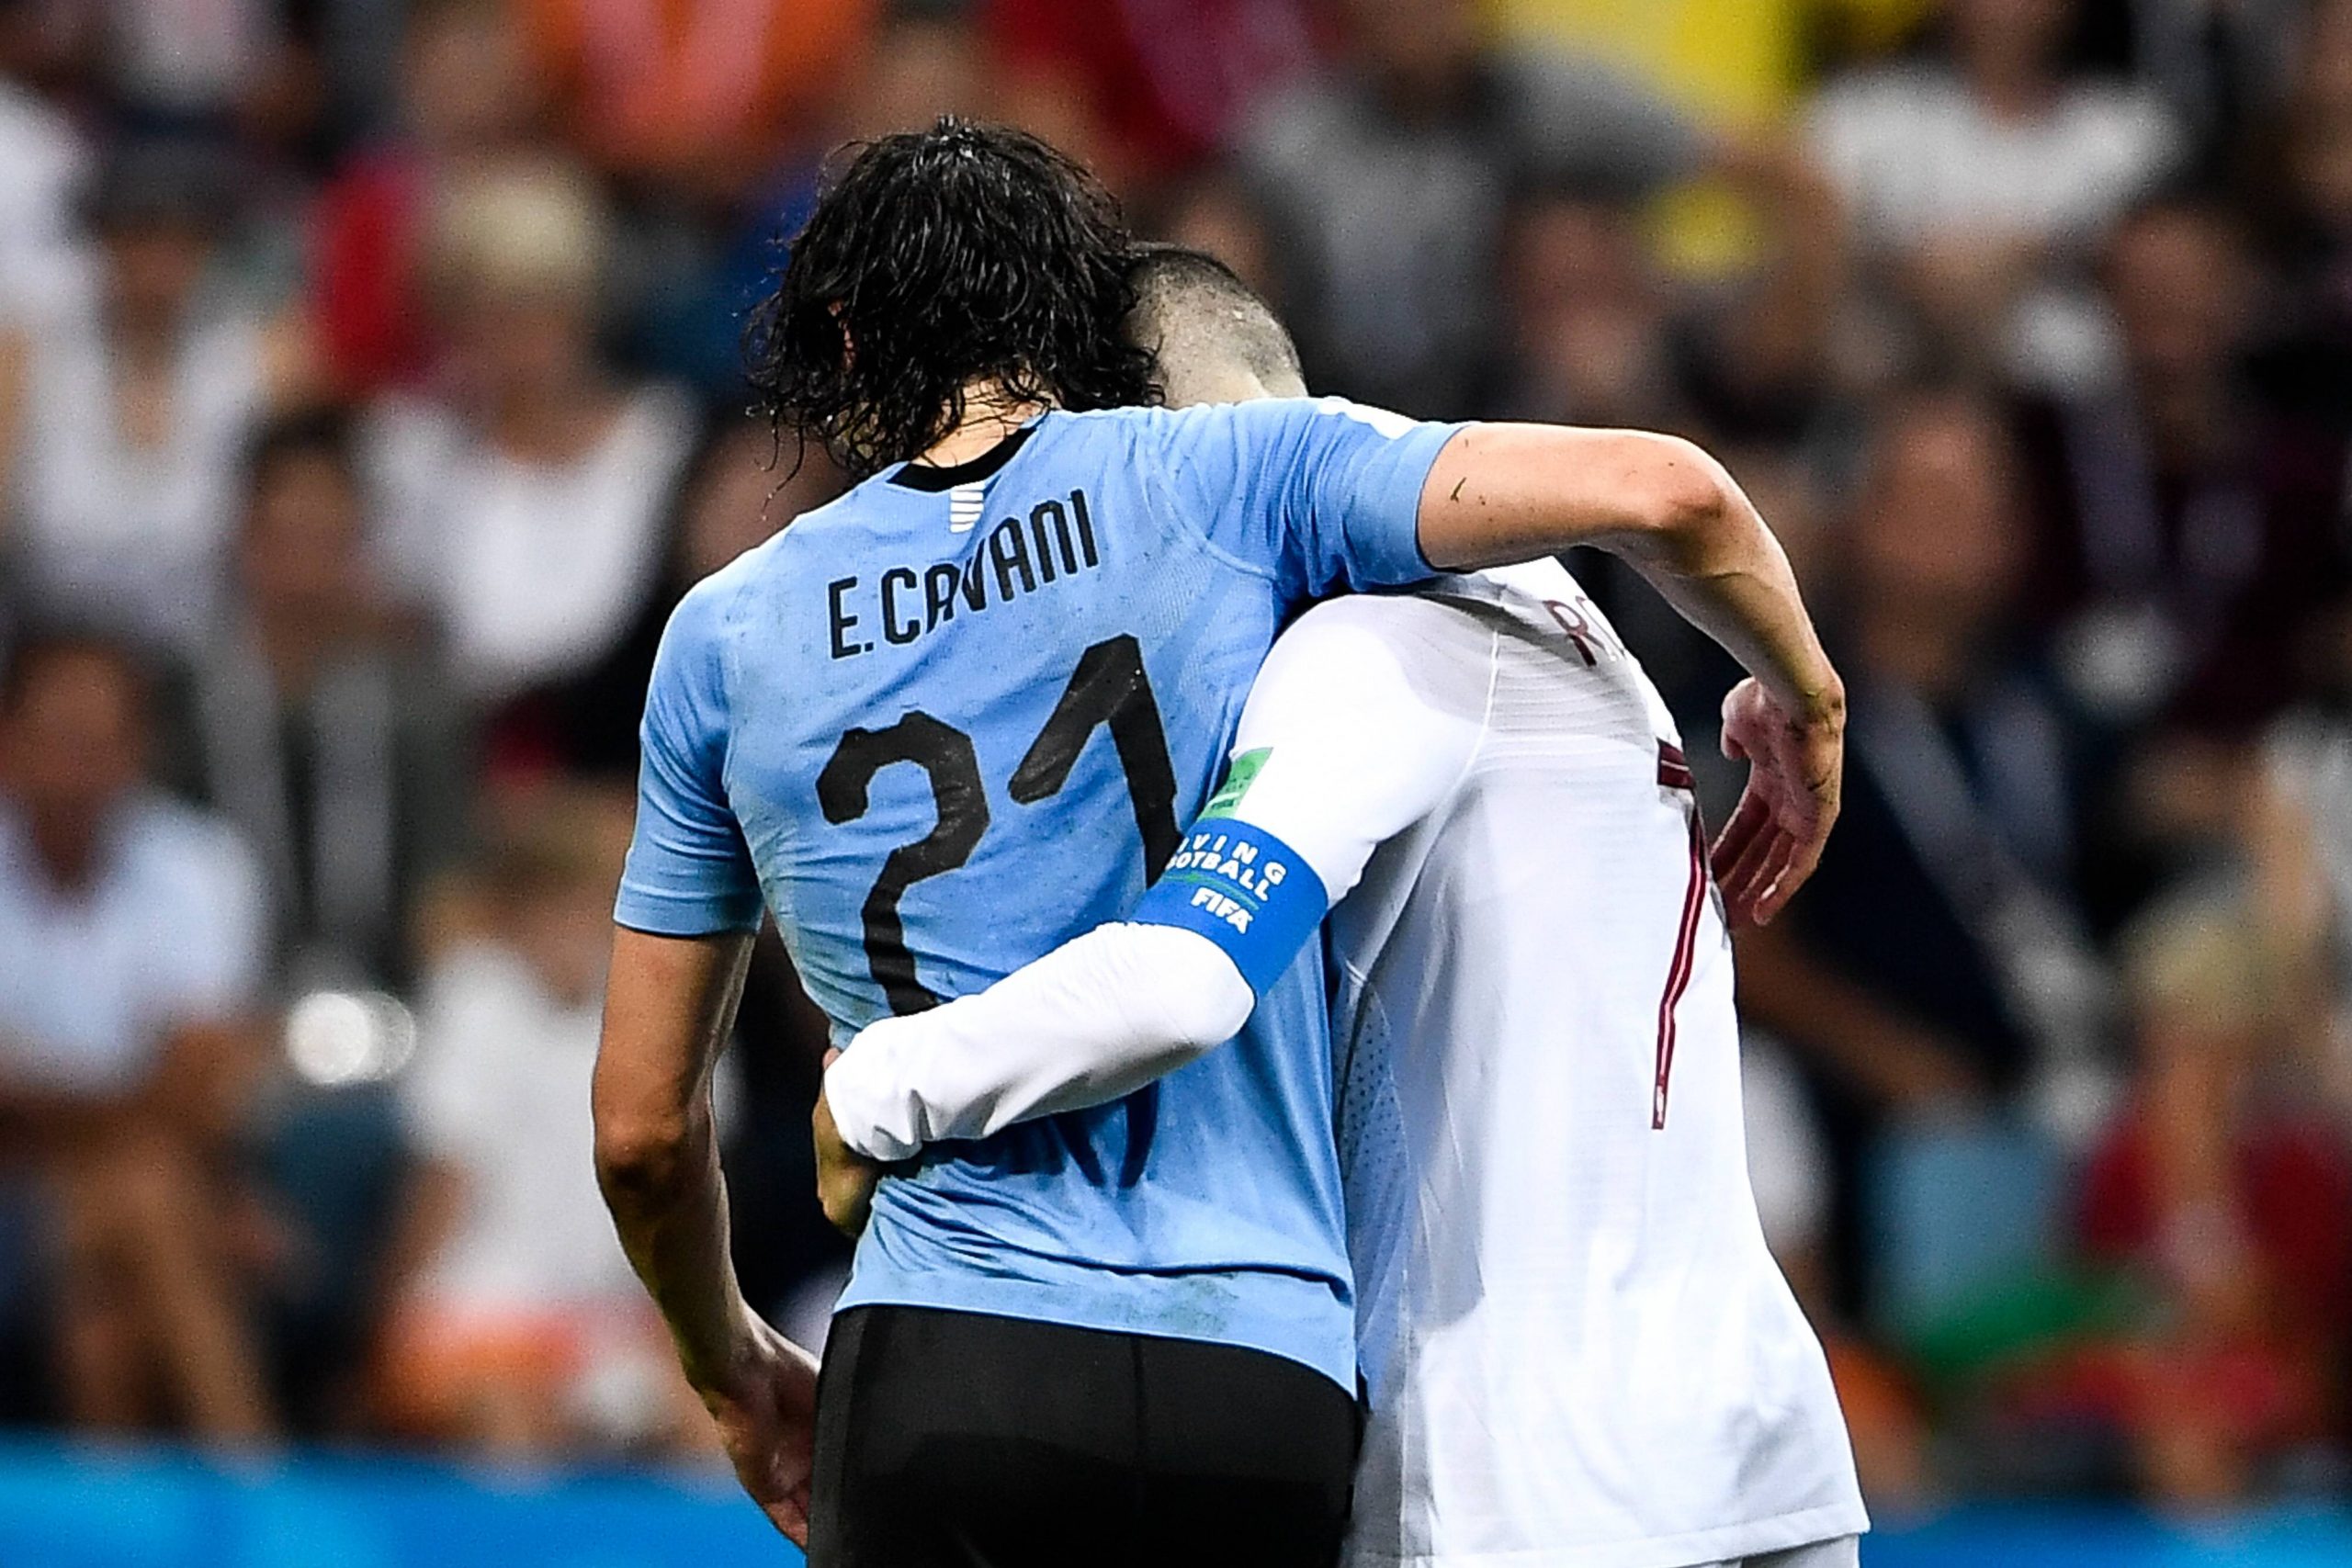 Cristiano Ronaldo of Portugal helps Edinson Cavani of Uruguay in the round of 16 match between Uruguay and Portugal during the 2018 FIFA World Cup.